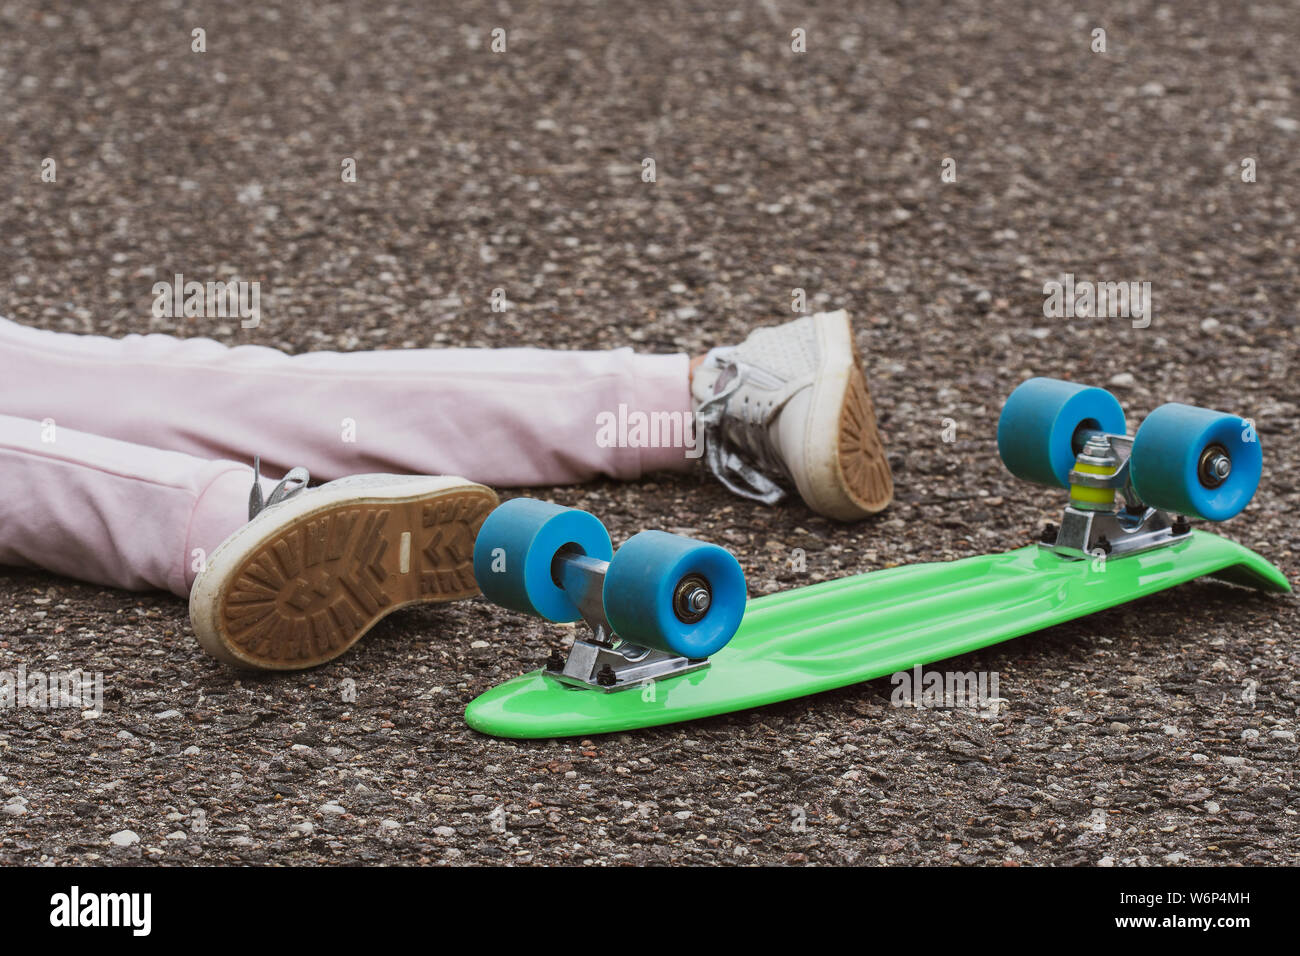 Skateboard Accident High Resolution Stock Photography and Images - Alamy